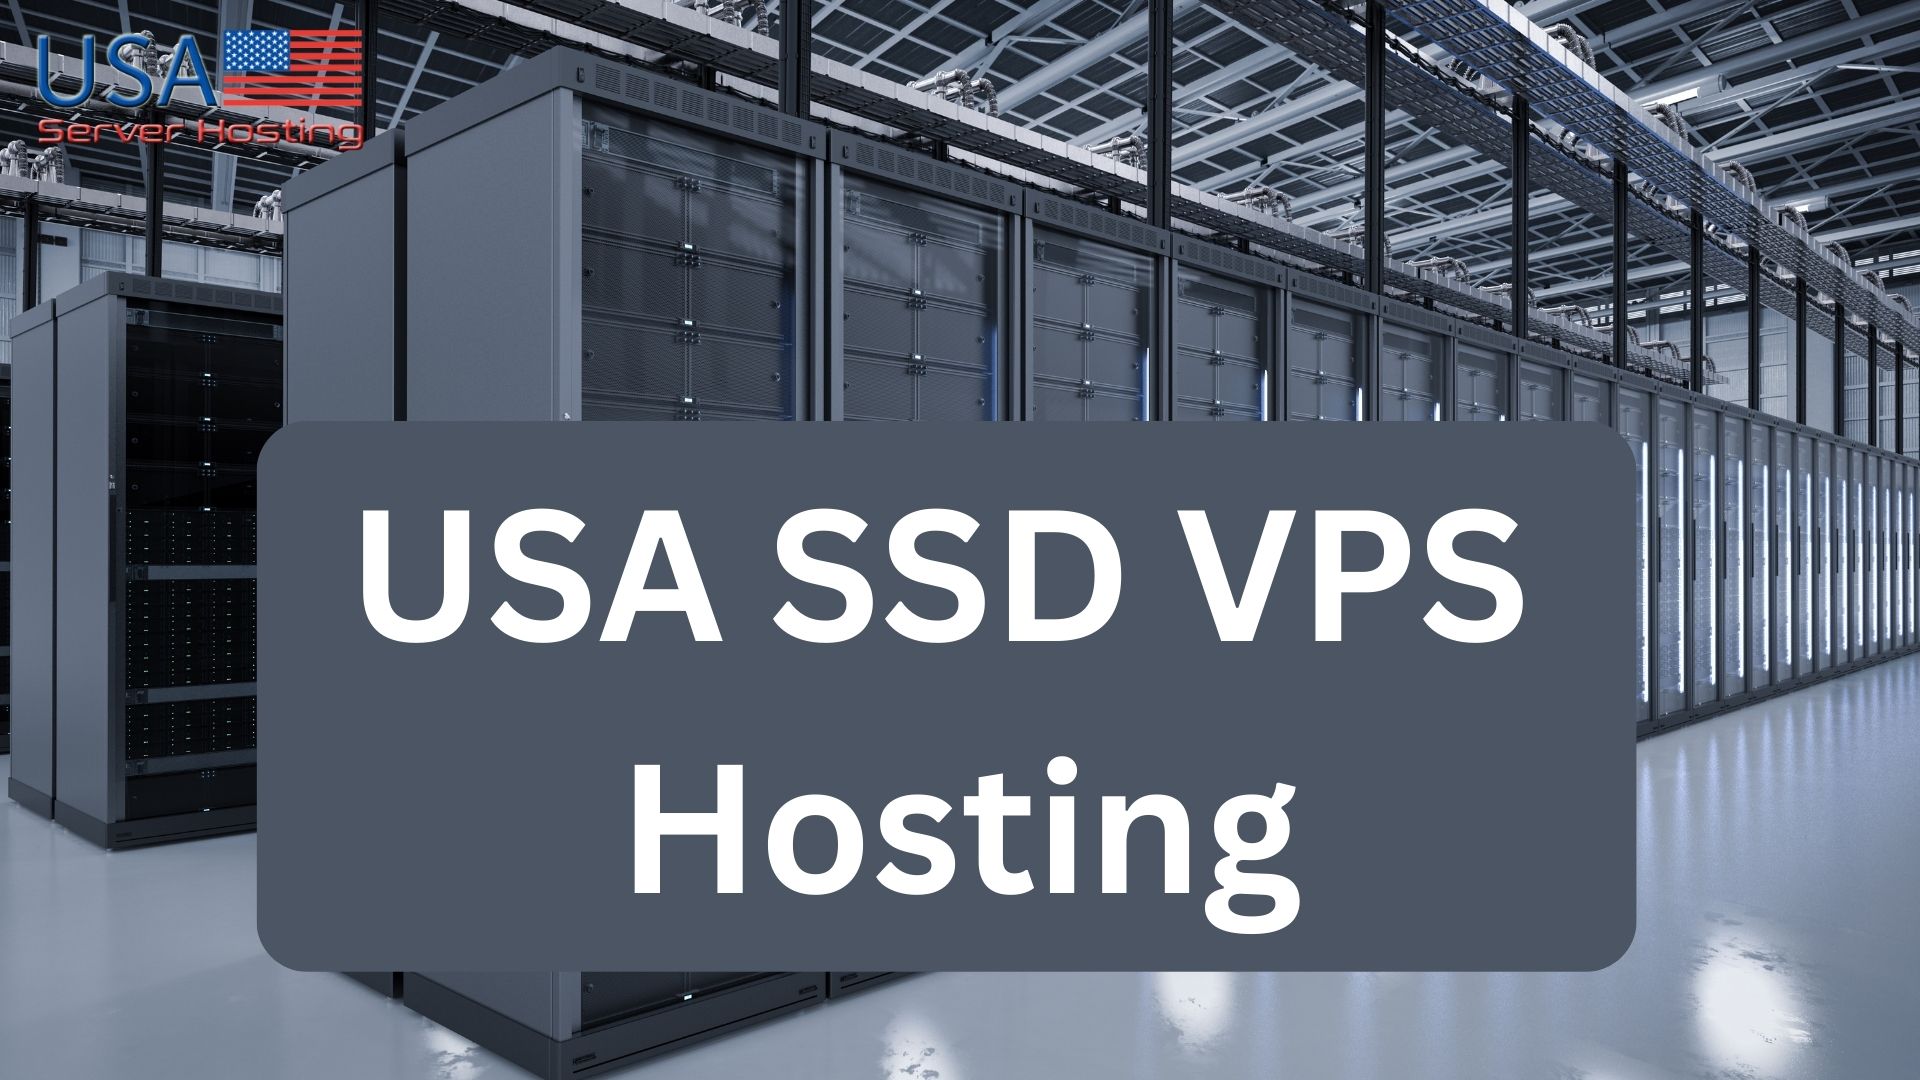 USA SSD VPS Hosting: Affordable and Reliable Hosting Solutions